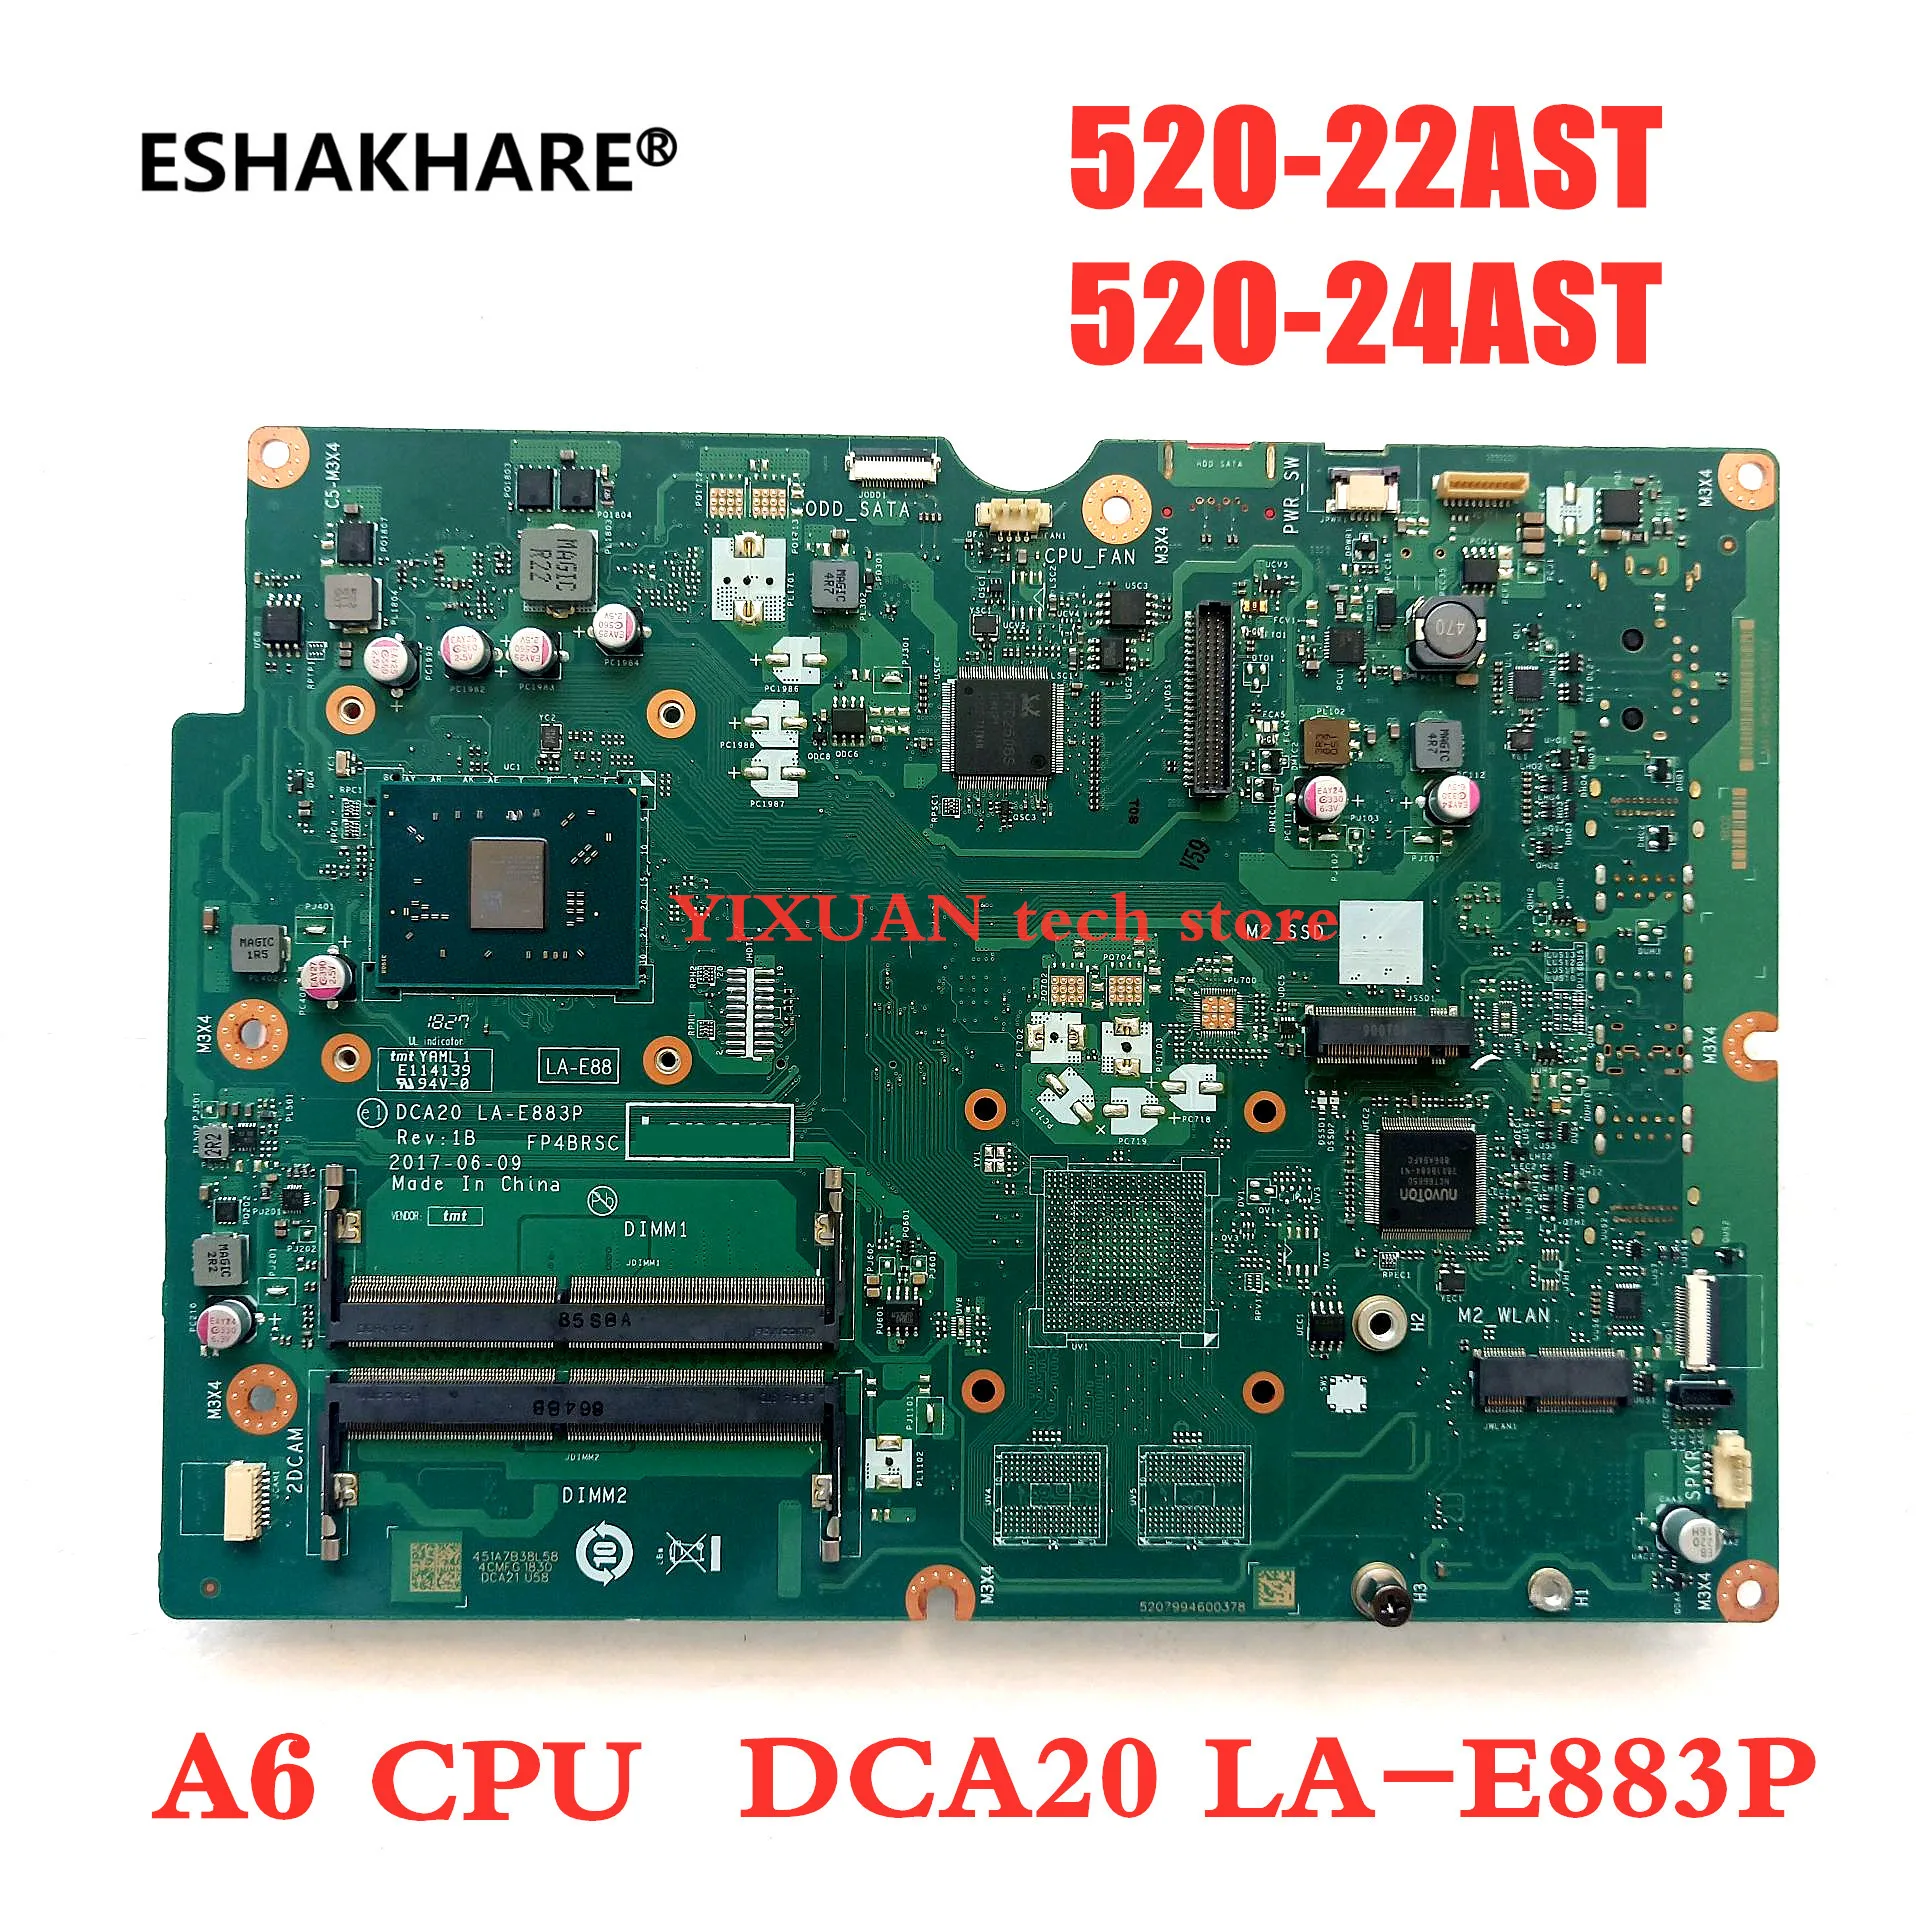 

ESHAKHARE For Lenovo AIO 520-22AST 520-24AST motherboard A10 A9 A6 UMA LA-E883P motherboard With CPU A6-9220 DDR4 100% test work